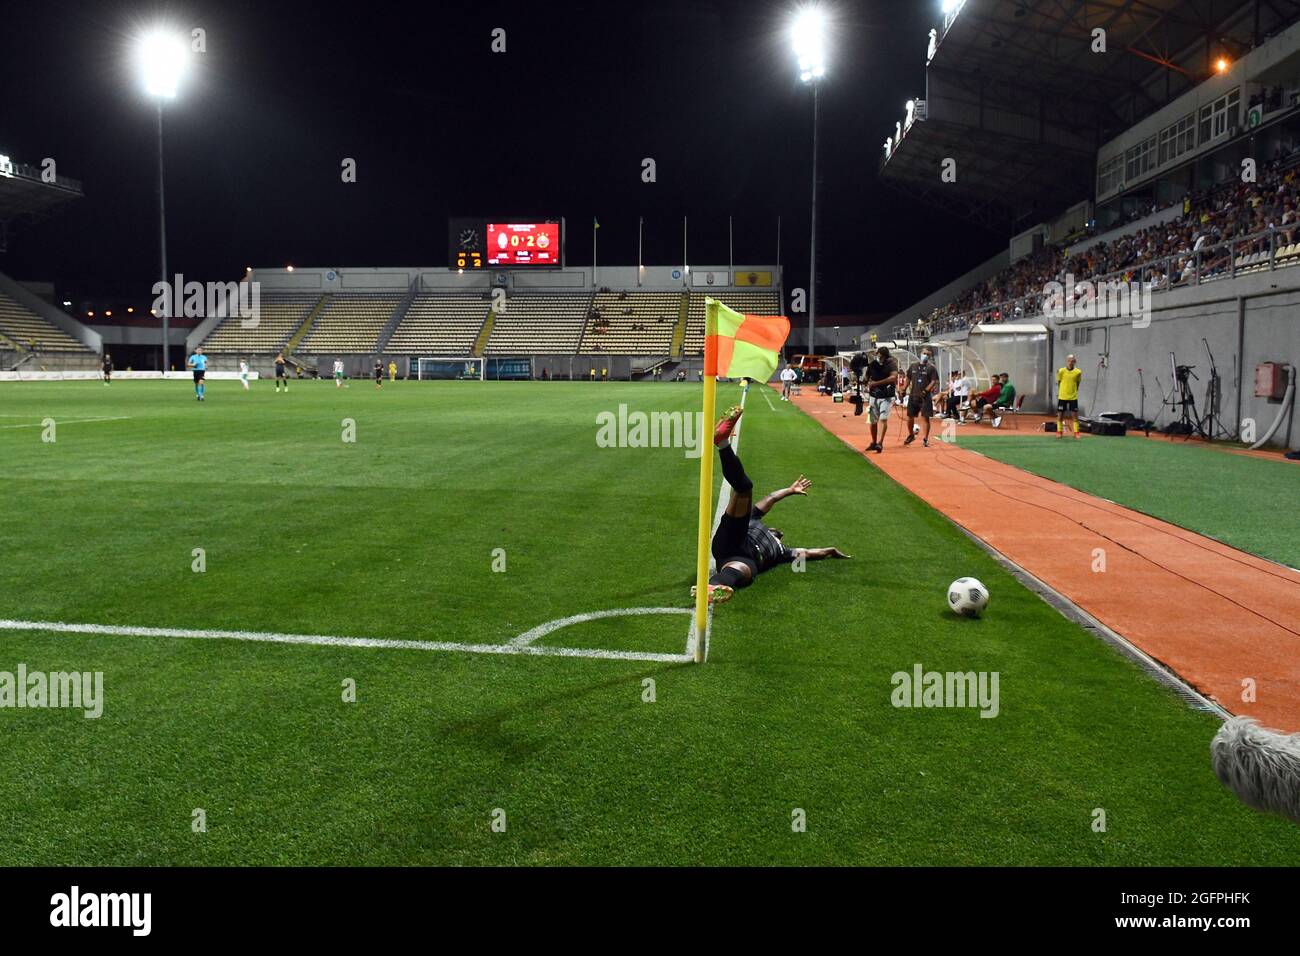 ZAPORIZHZHIA, UKRAINE - AUGUST 26, 2021 - A player of FC Zorya Luhansk falls on the pitch during the 2021/2022 UEFA Europa League play-off 2nd leg game against SK Rapid Wien at the Slavutych Arena, Zaporizhzhia, southeastern Ukraine. Stock Photo